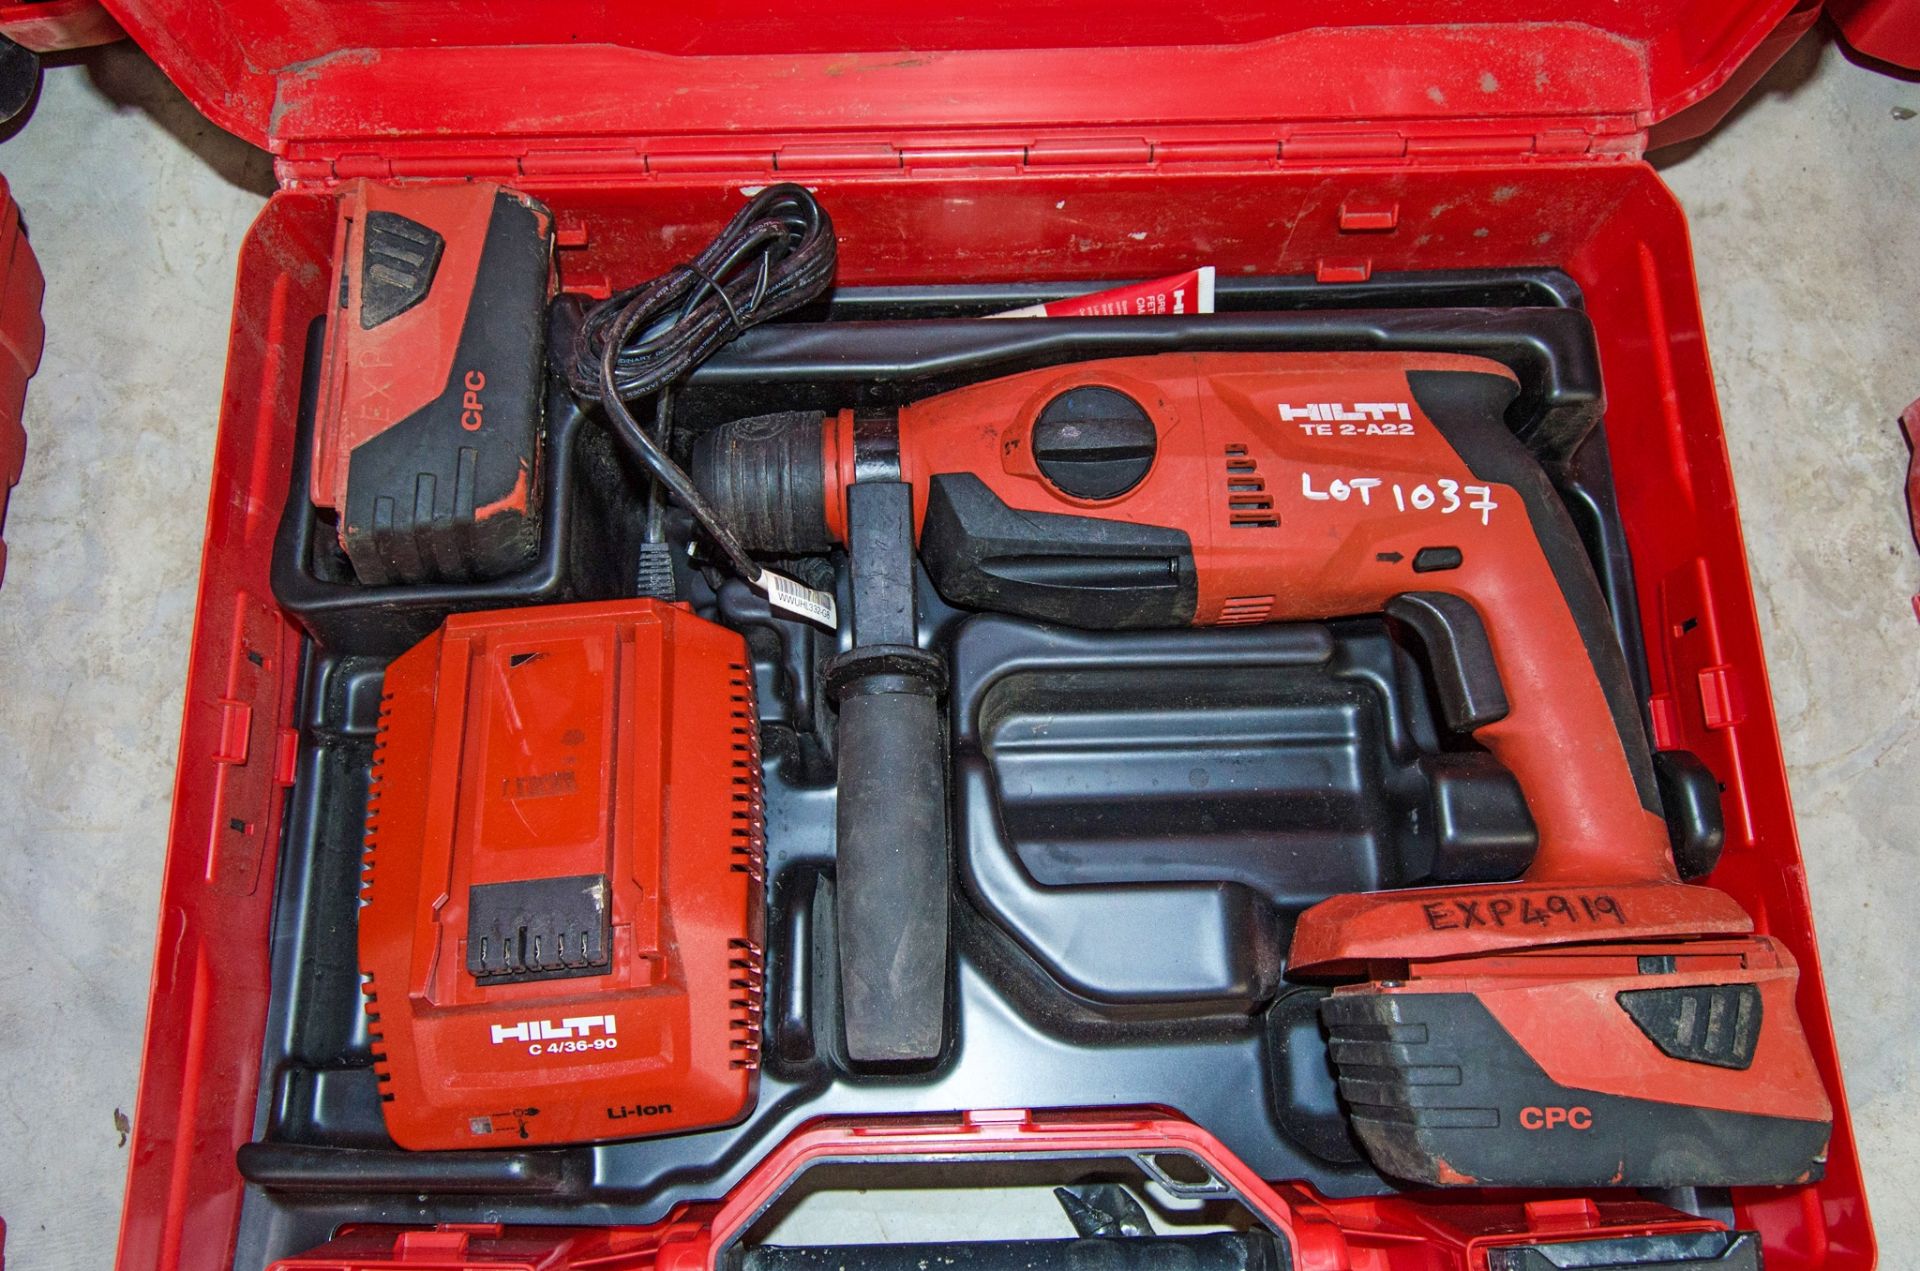 Hilti TE2-A22 22v cordless SDS rotary hammer drill c/w 2 batteries, charger and carry case EXP4919